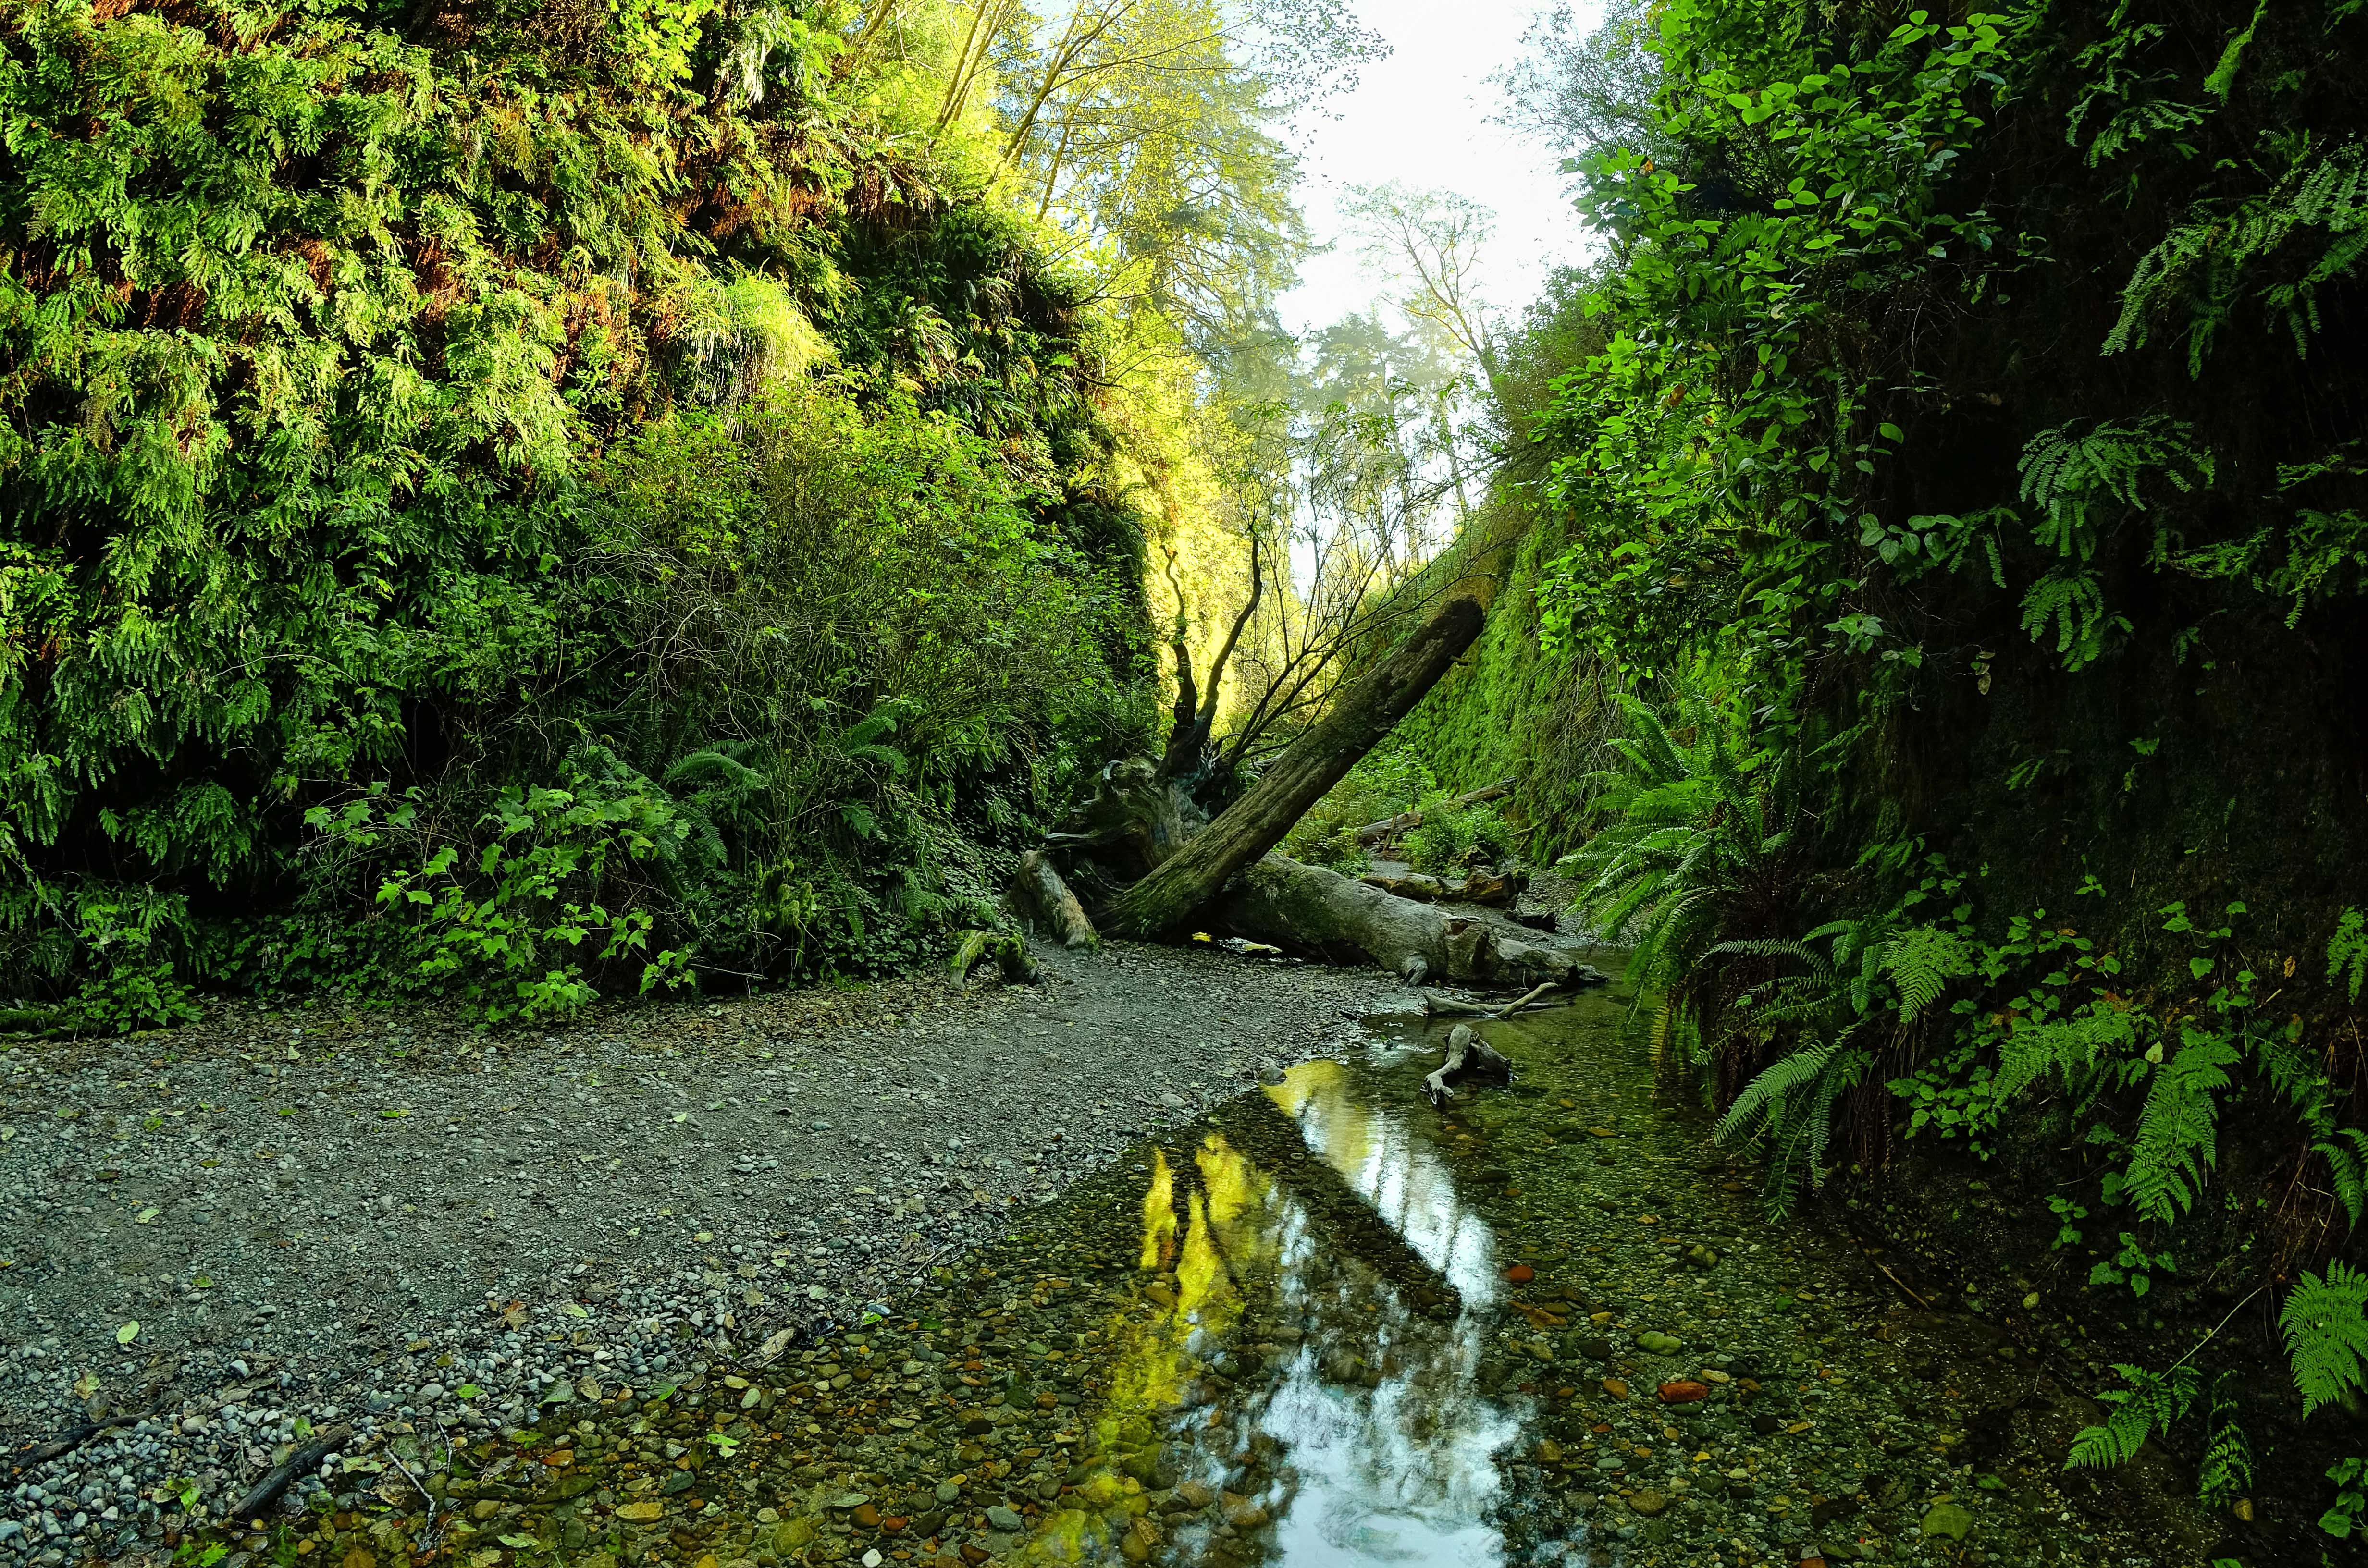 A cobbled creek flows between two vertical walls of rock and ferns.